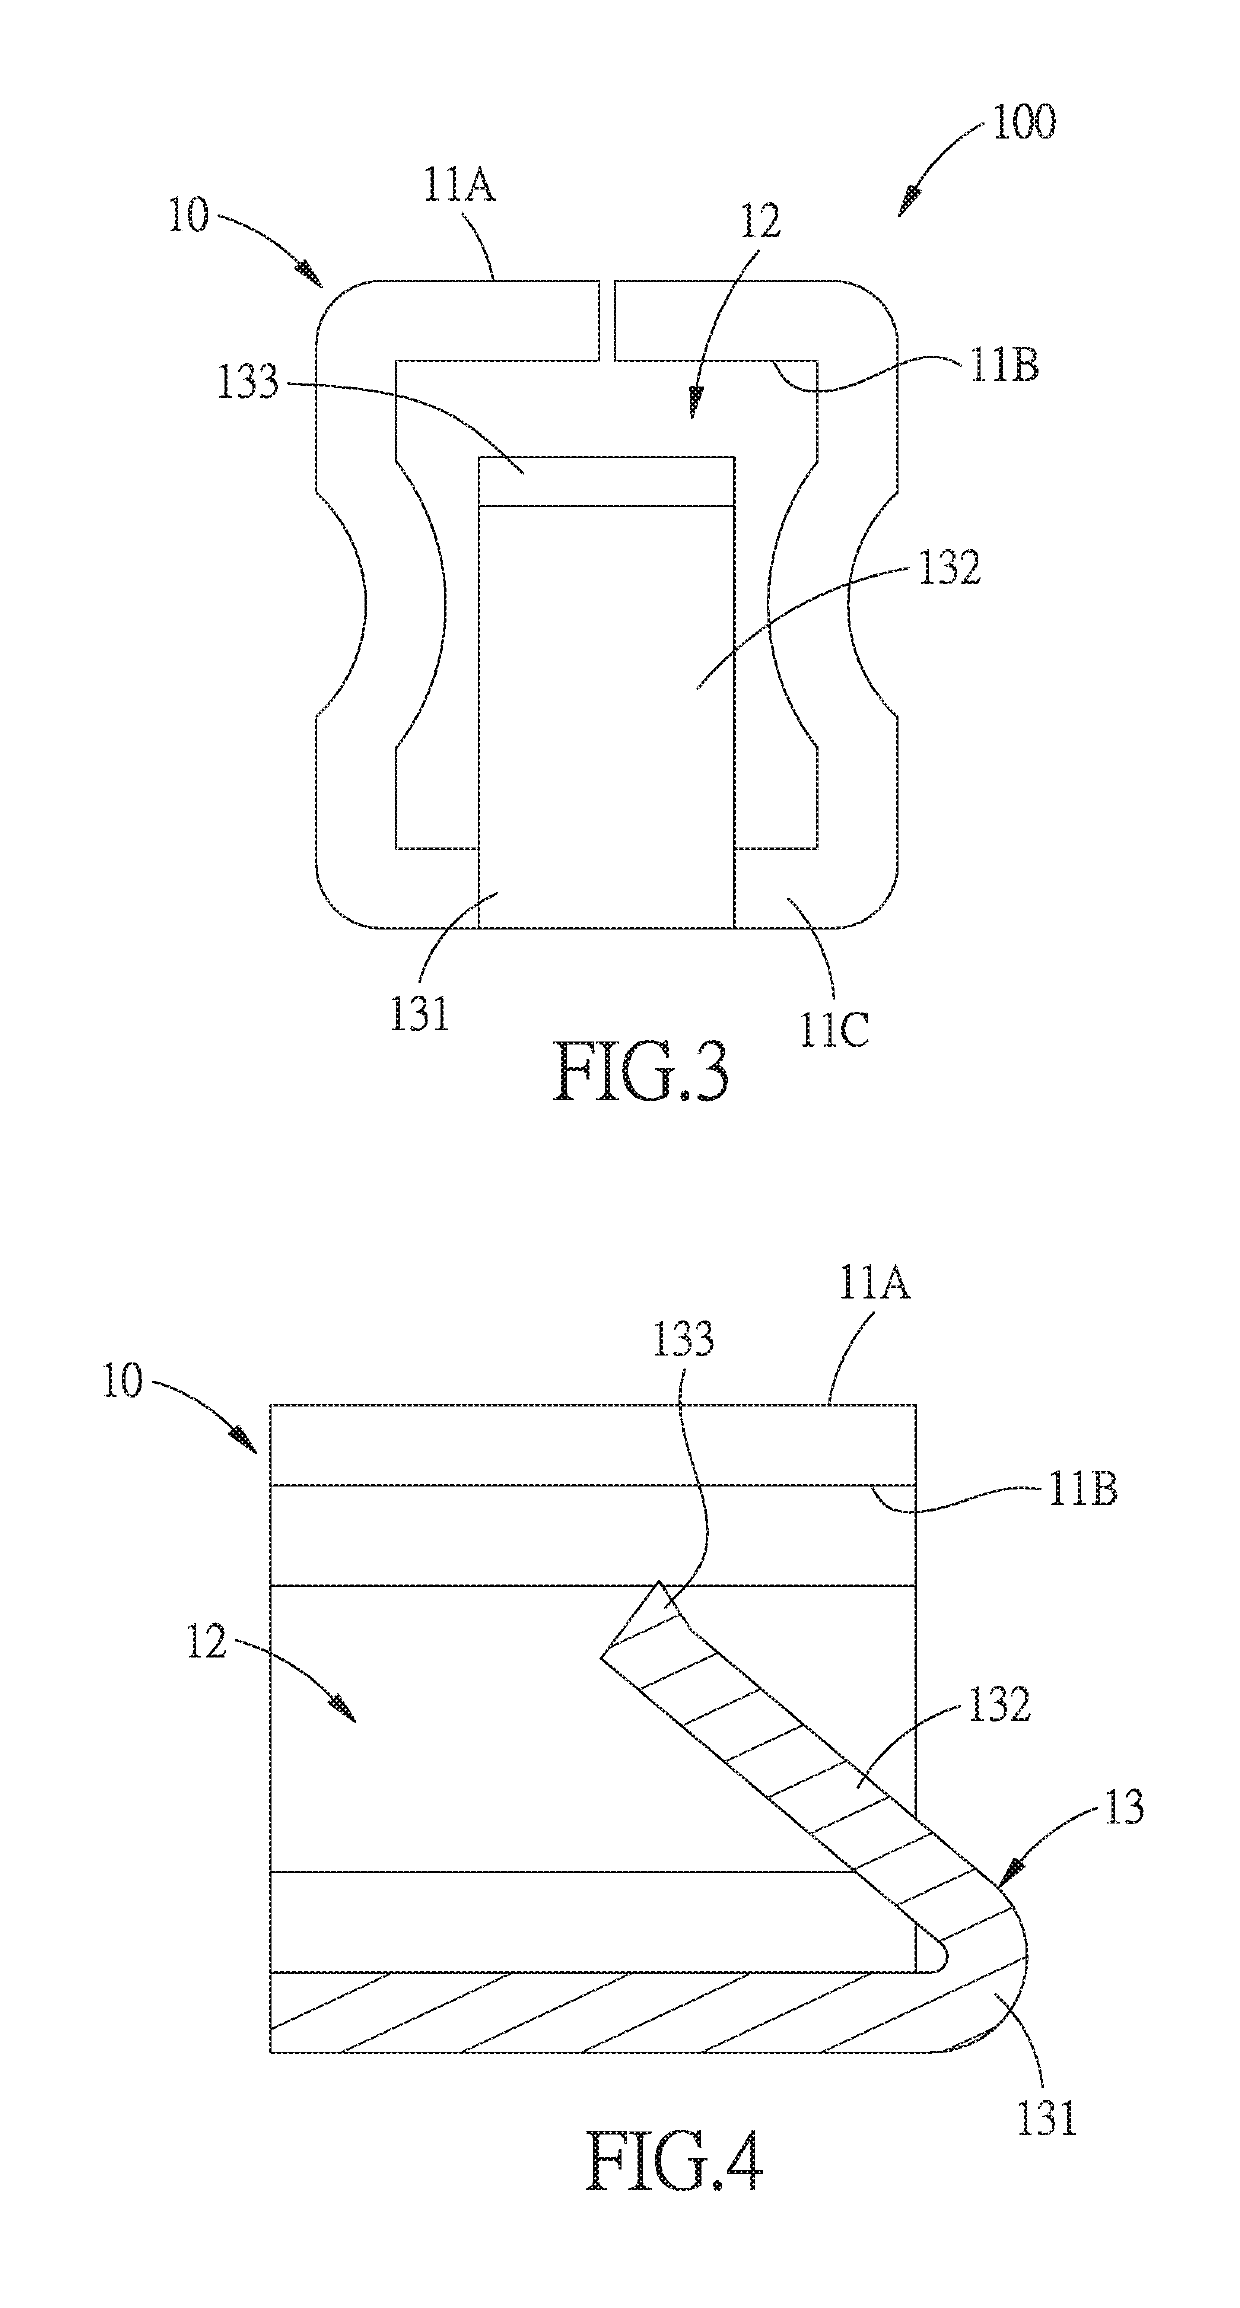 Circuit board with wire conductive pads and method for fixing the wire conductive pads to the circuit board